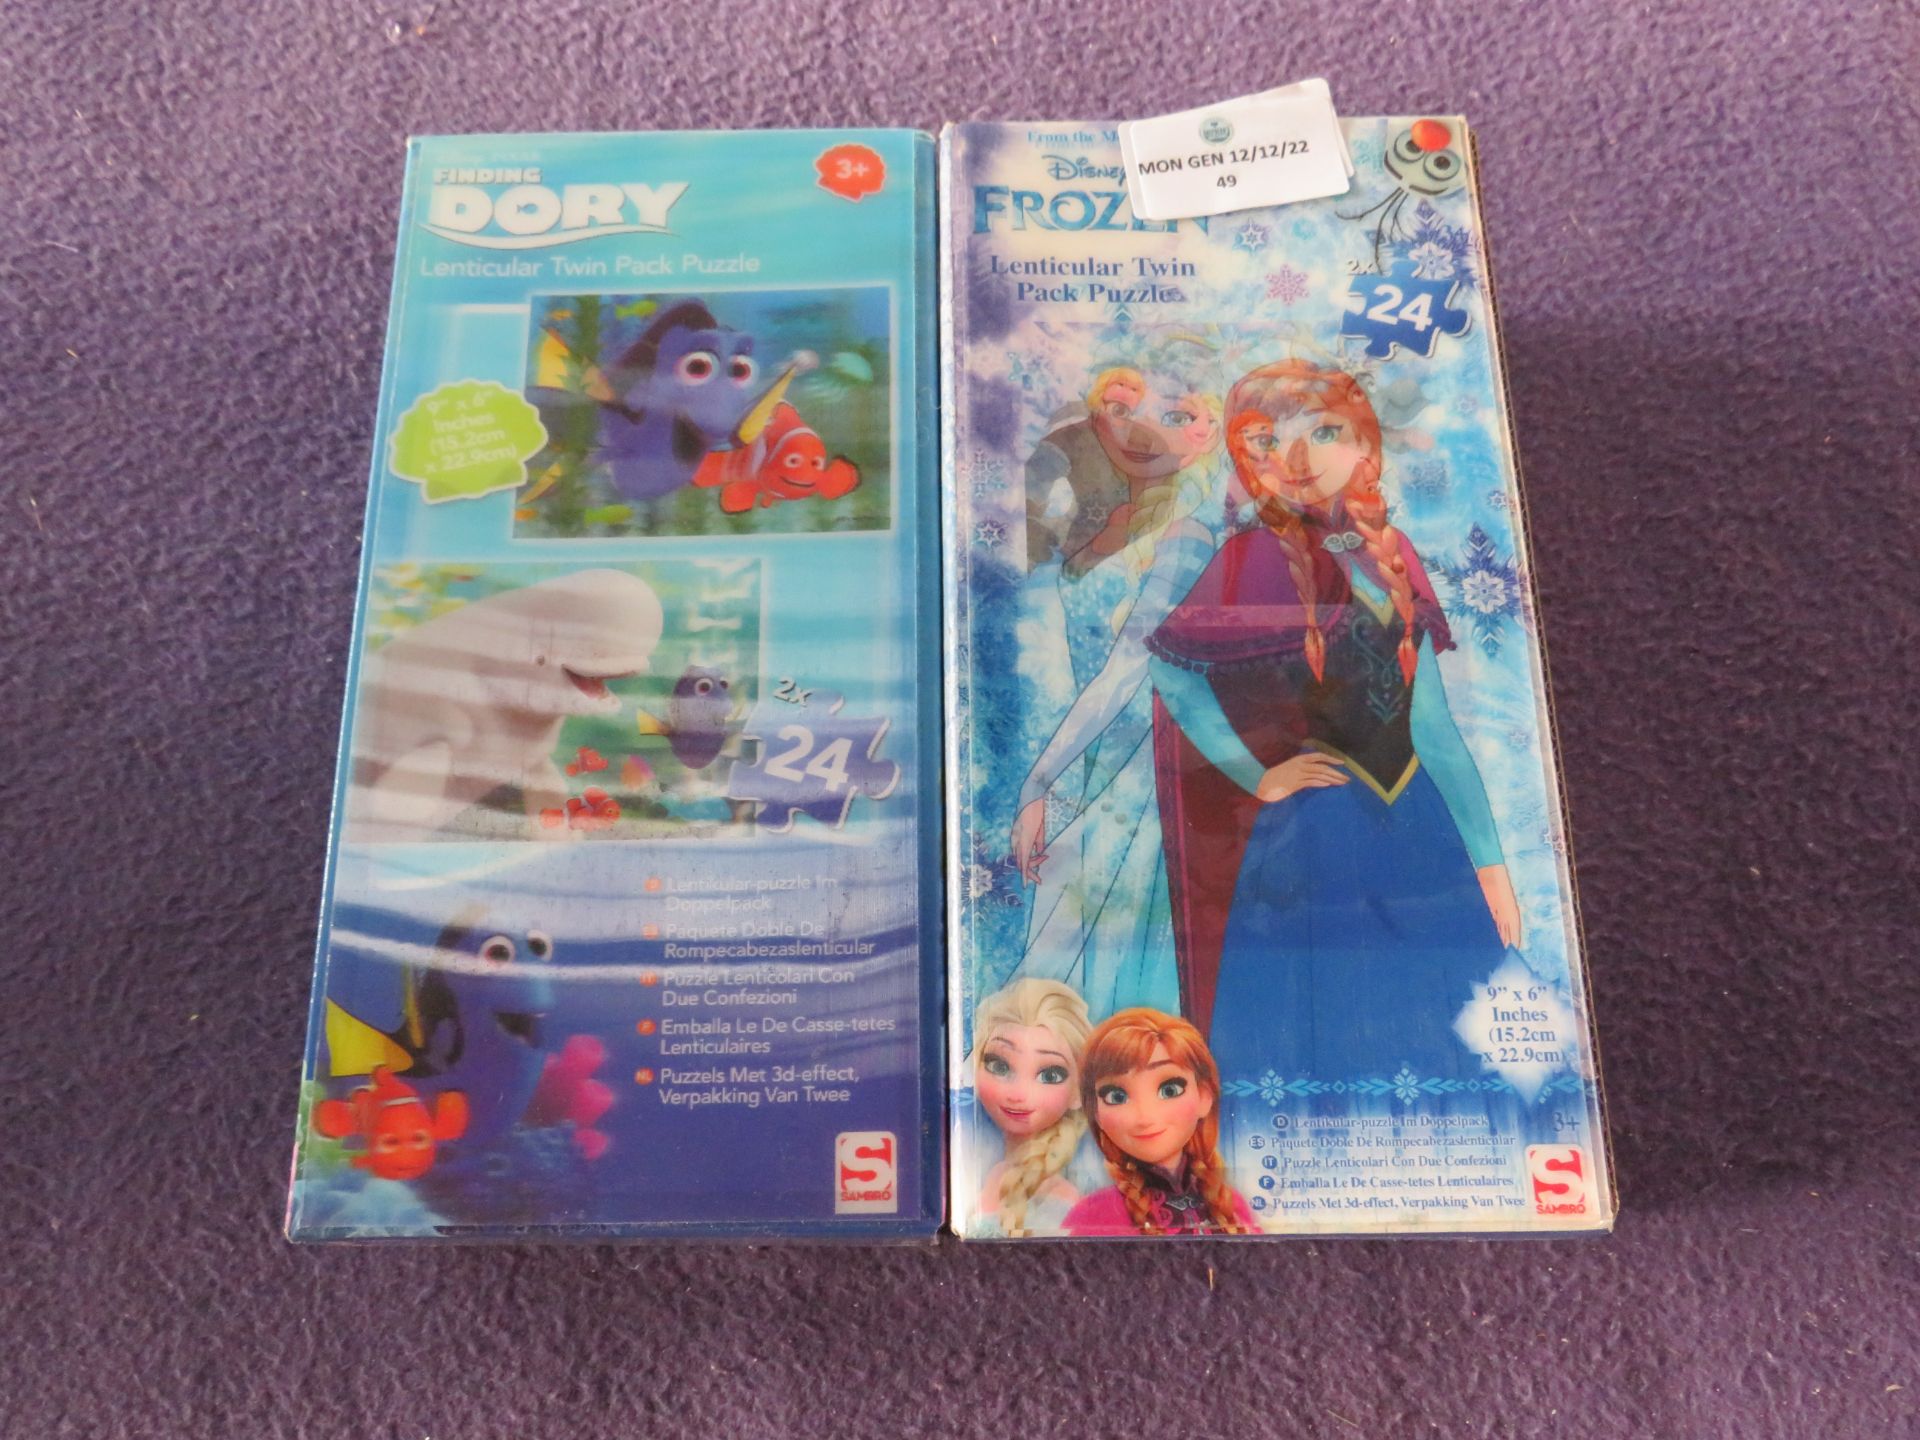 1x Finding Dory - Lenticular Twin Pack Puzzle - Unchecked & Boxed.1x Disney Frozen - Lenticular Twin